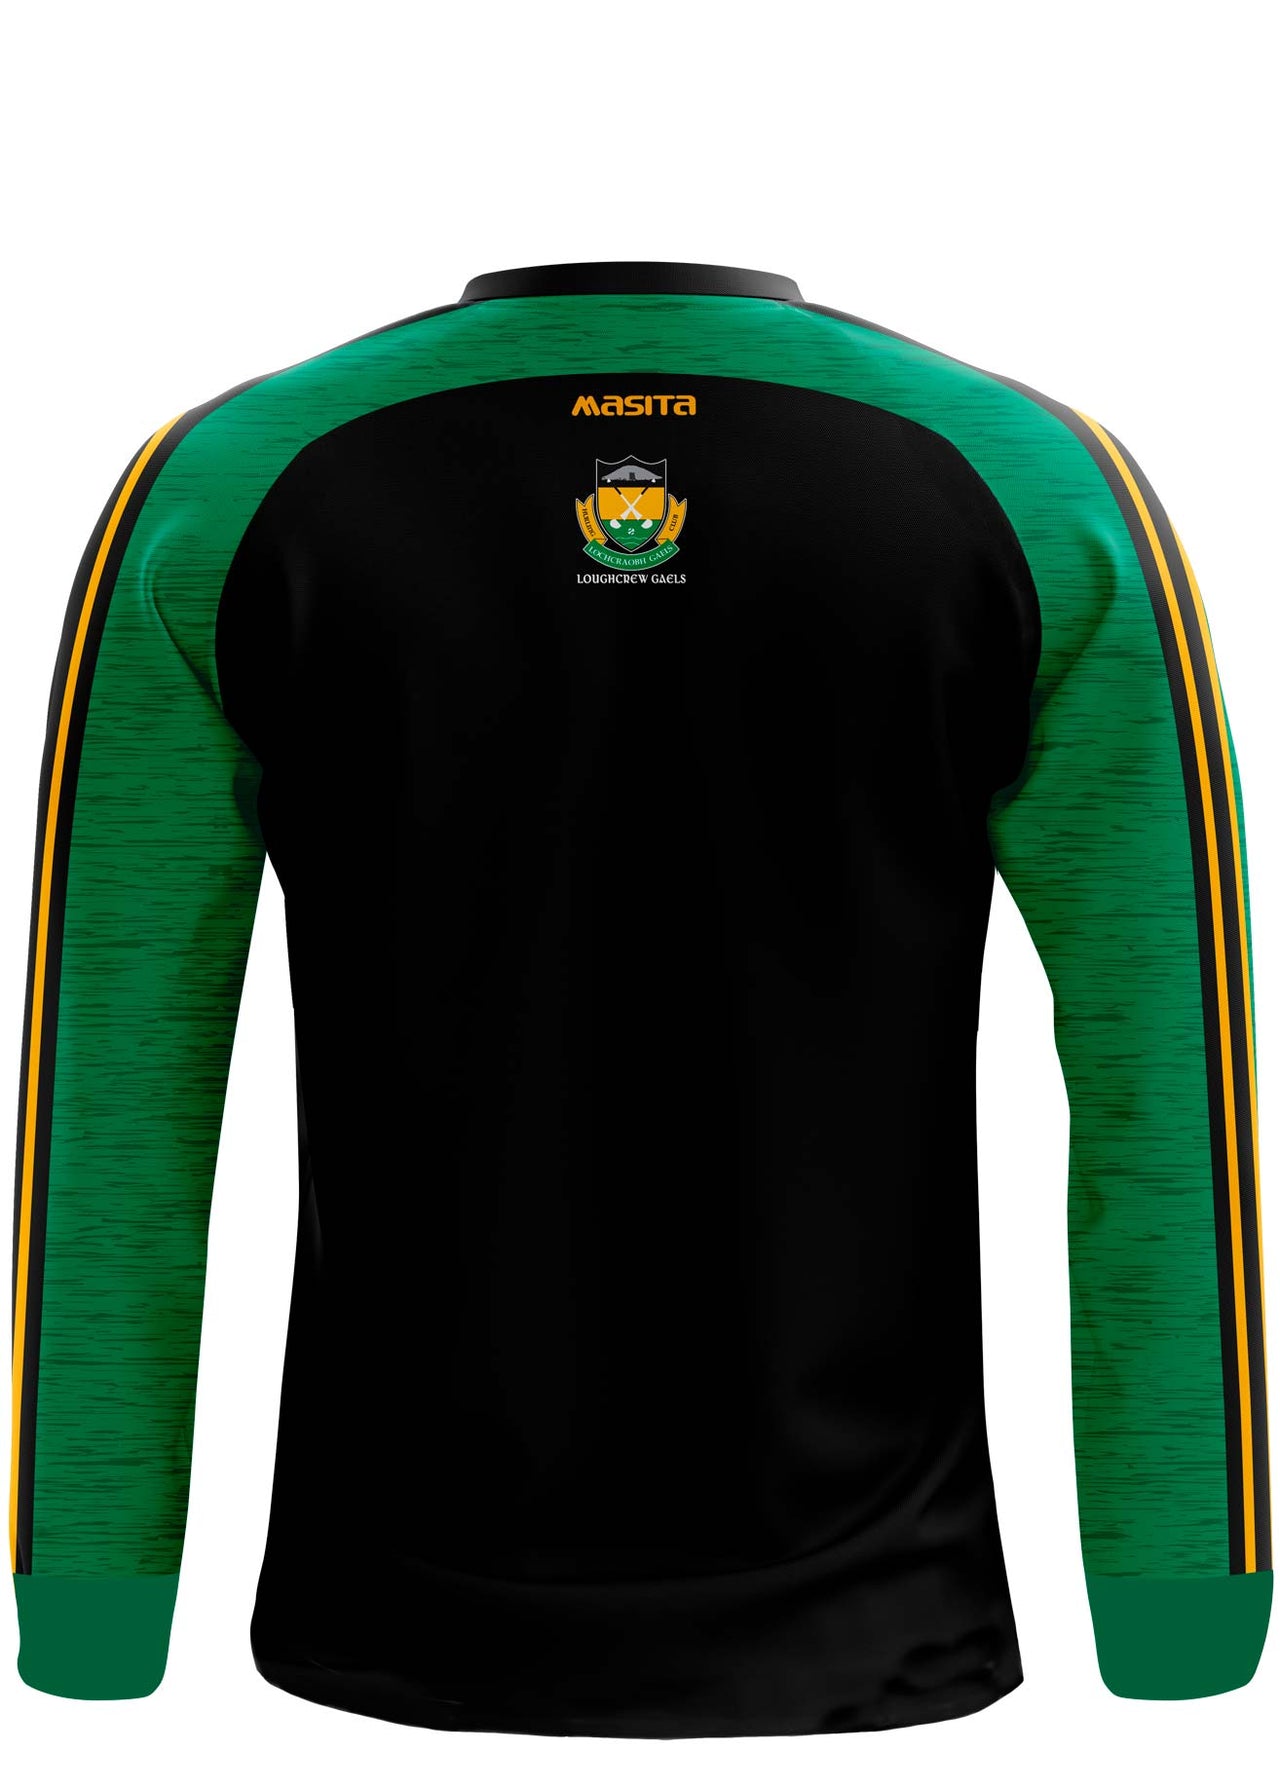 Loughcrew Gaels Sweater Adults